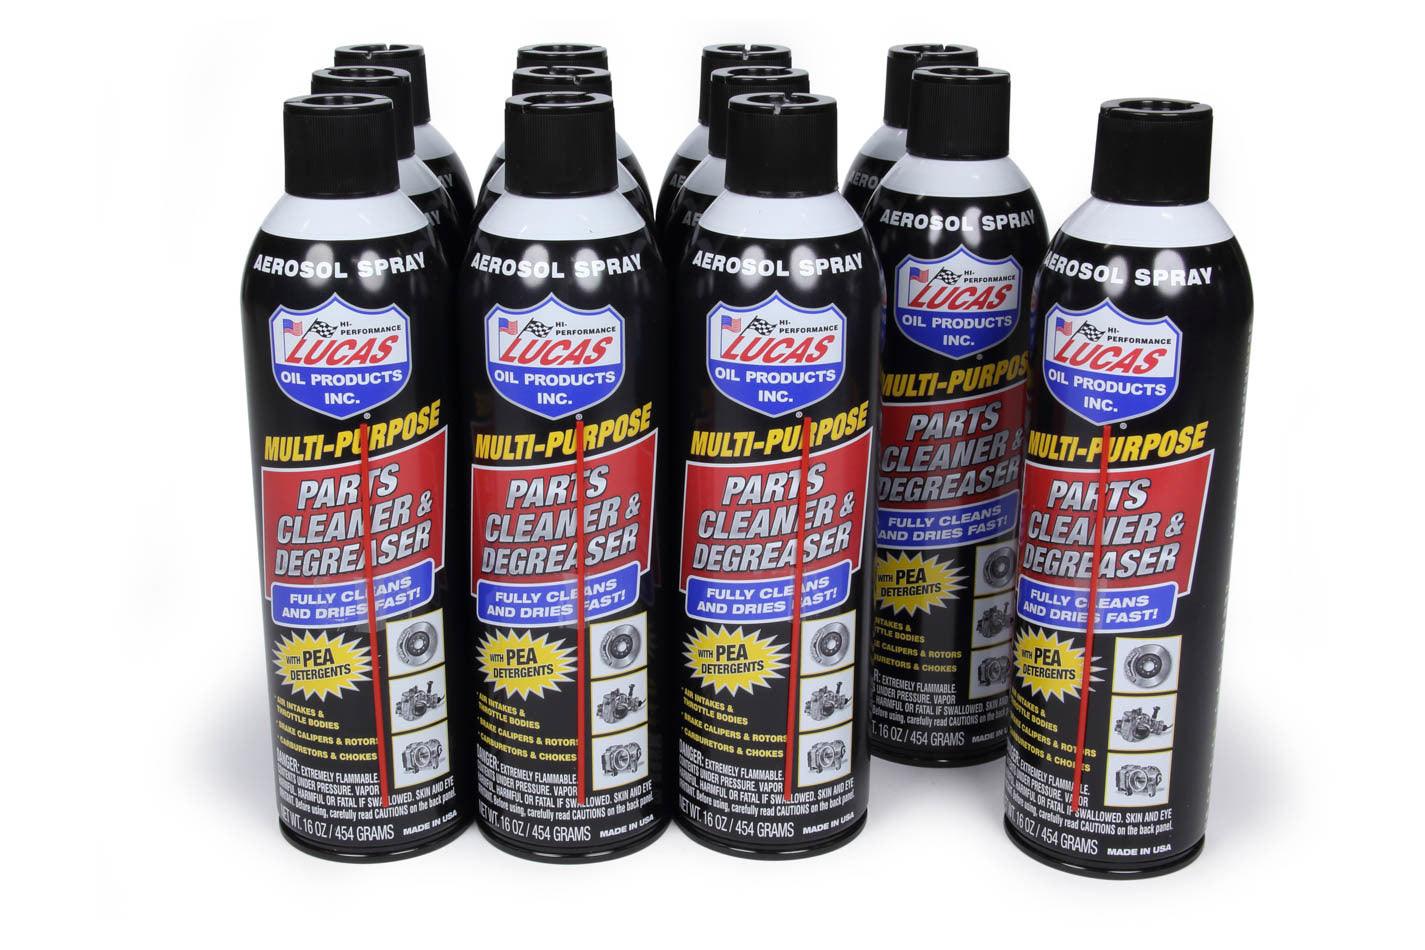 Parts Cleaner & Degrease r Case 12x16oz - Burlile Performance Products